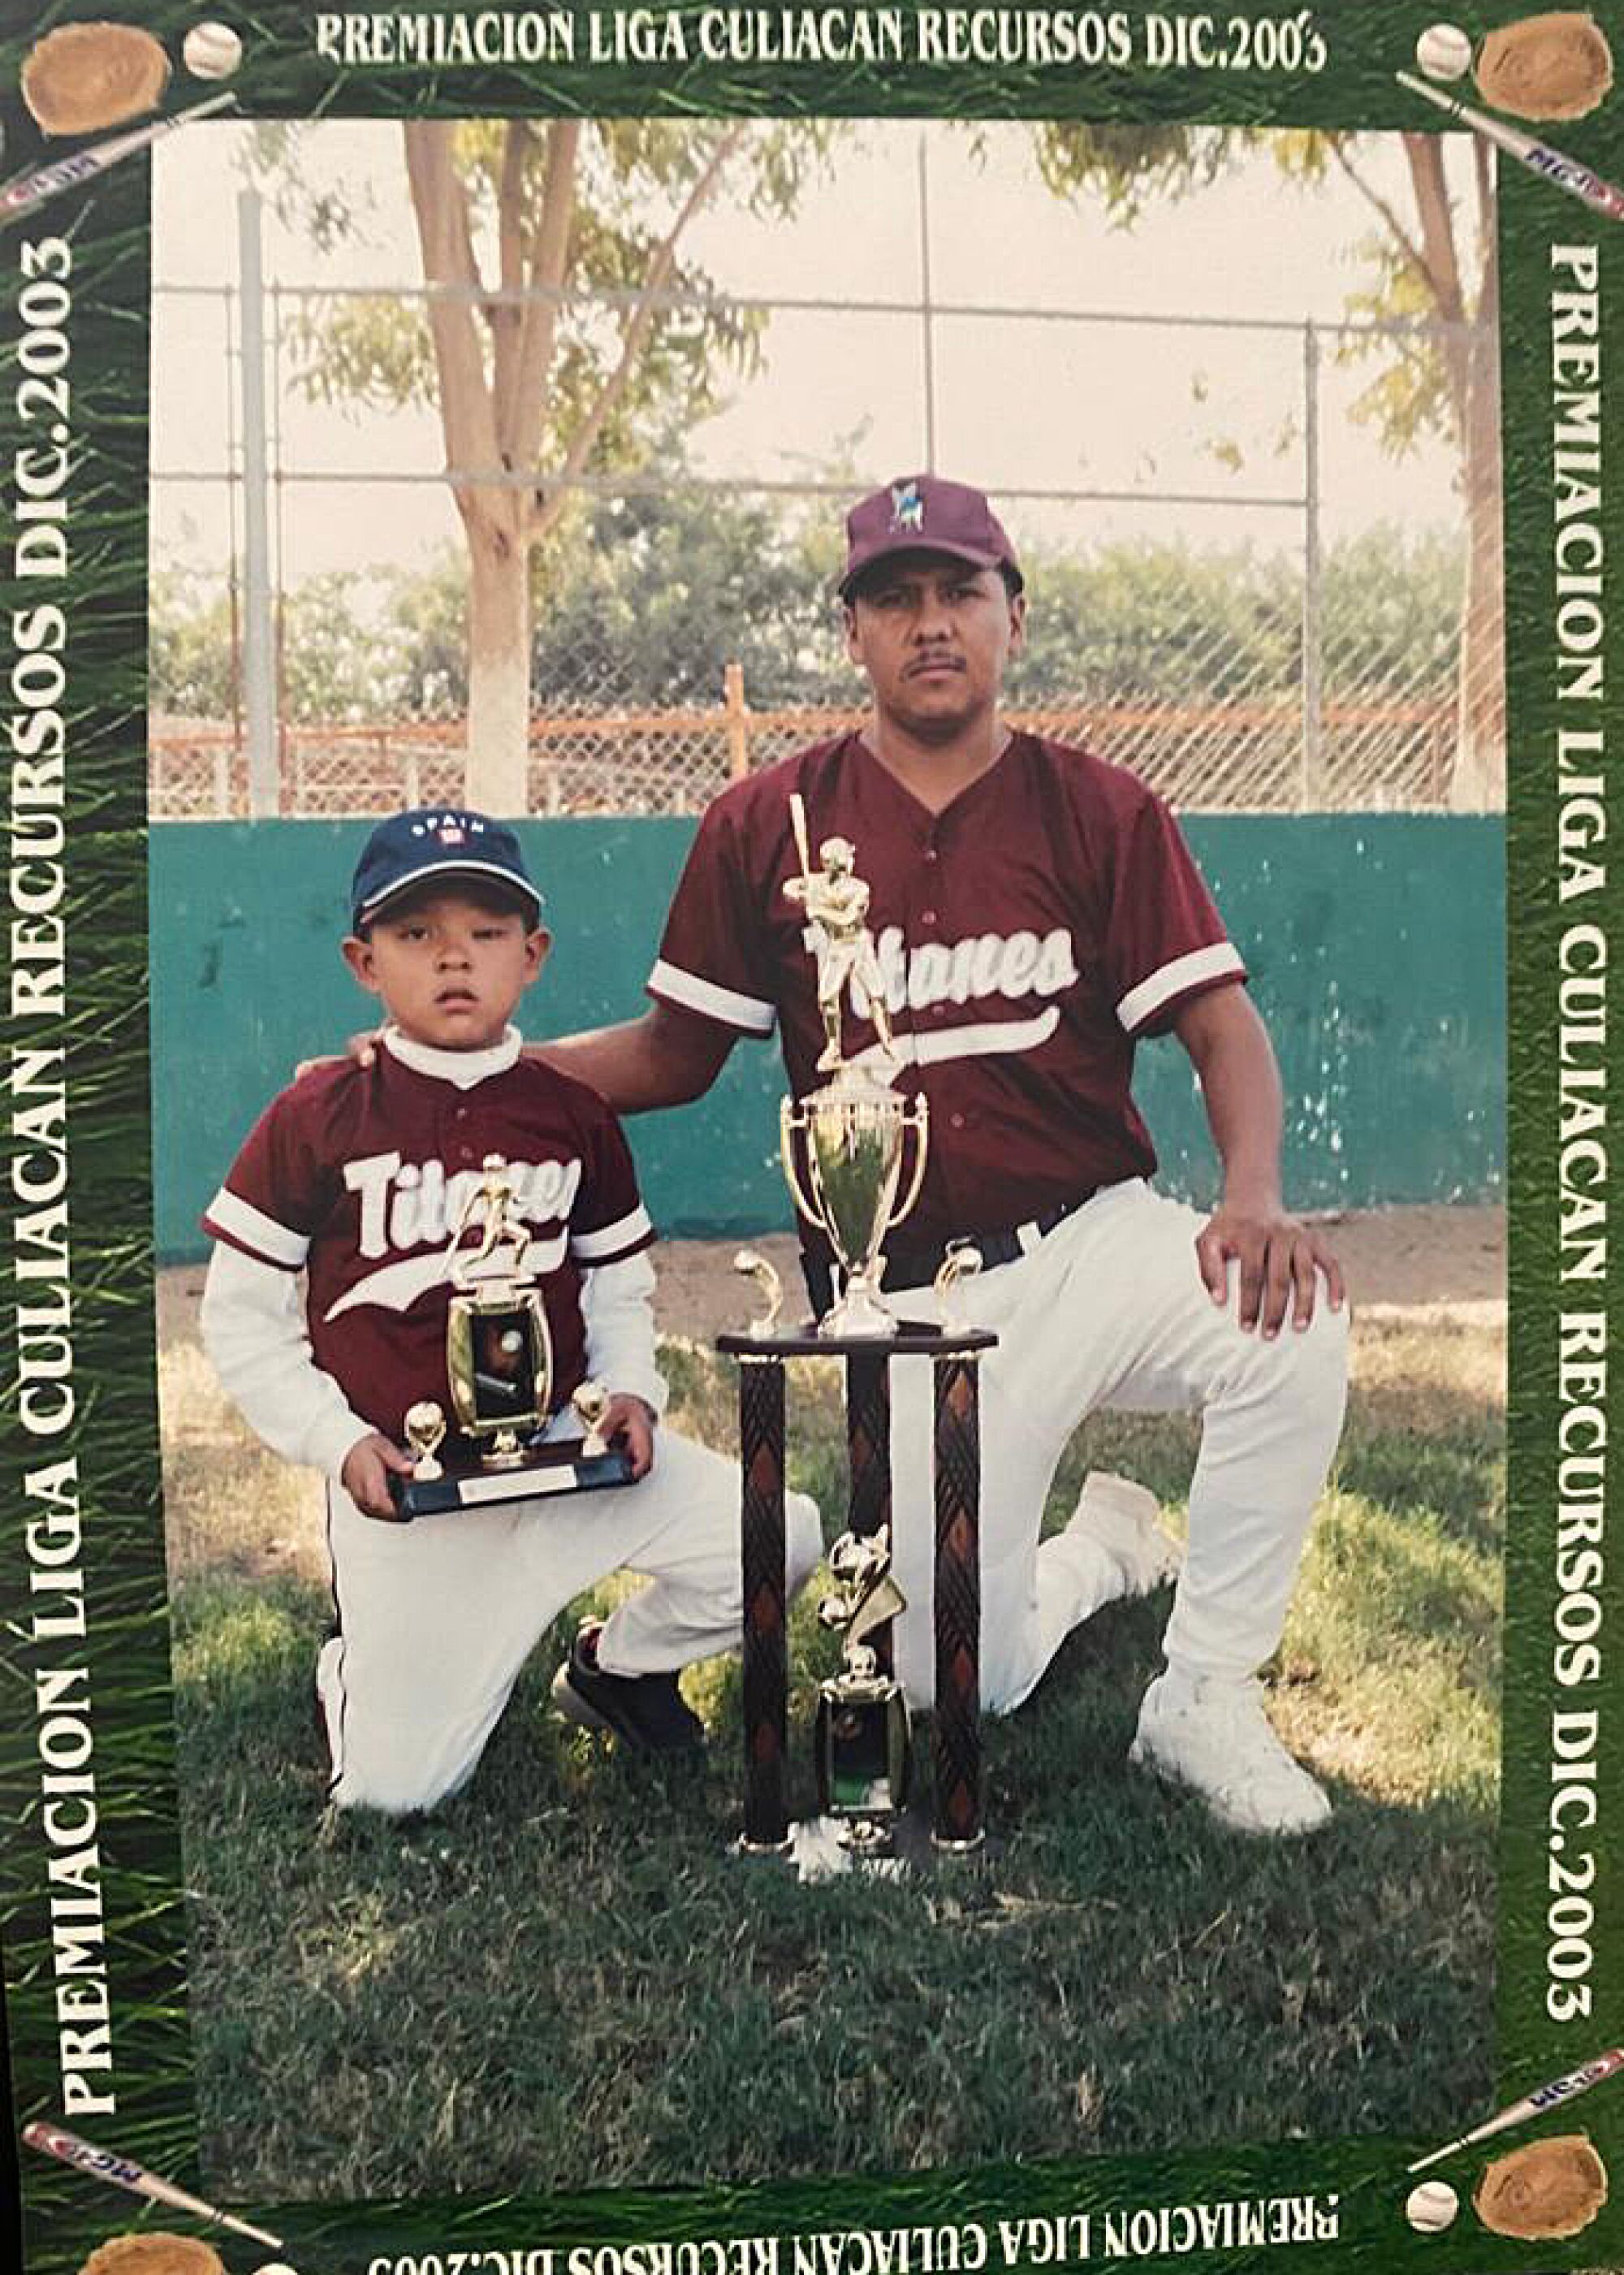 Carlos Urías coached his son's team from the time Julio was 6 until he turned pro.